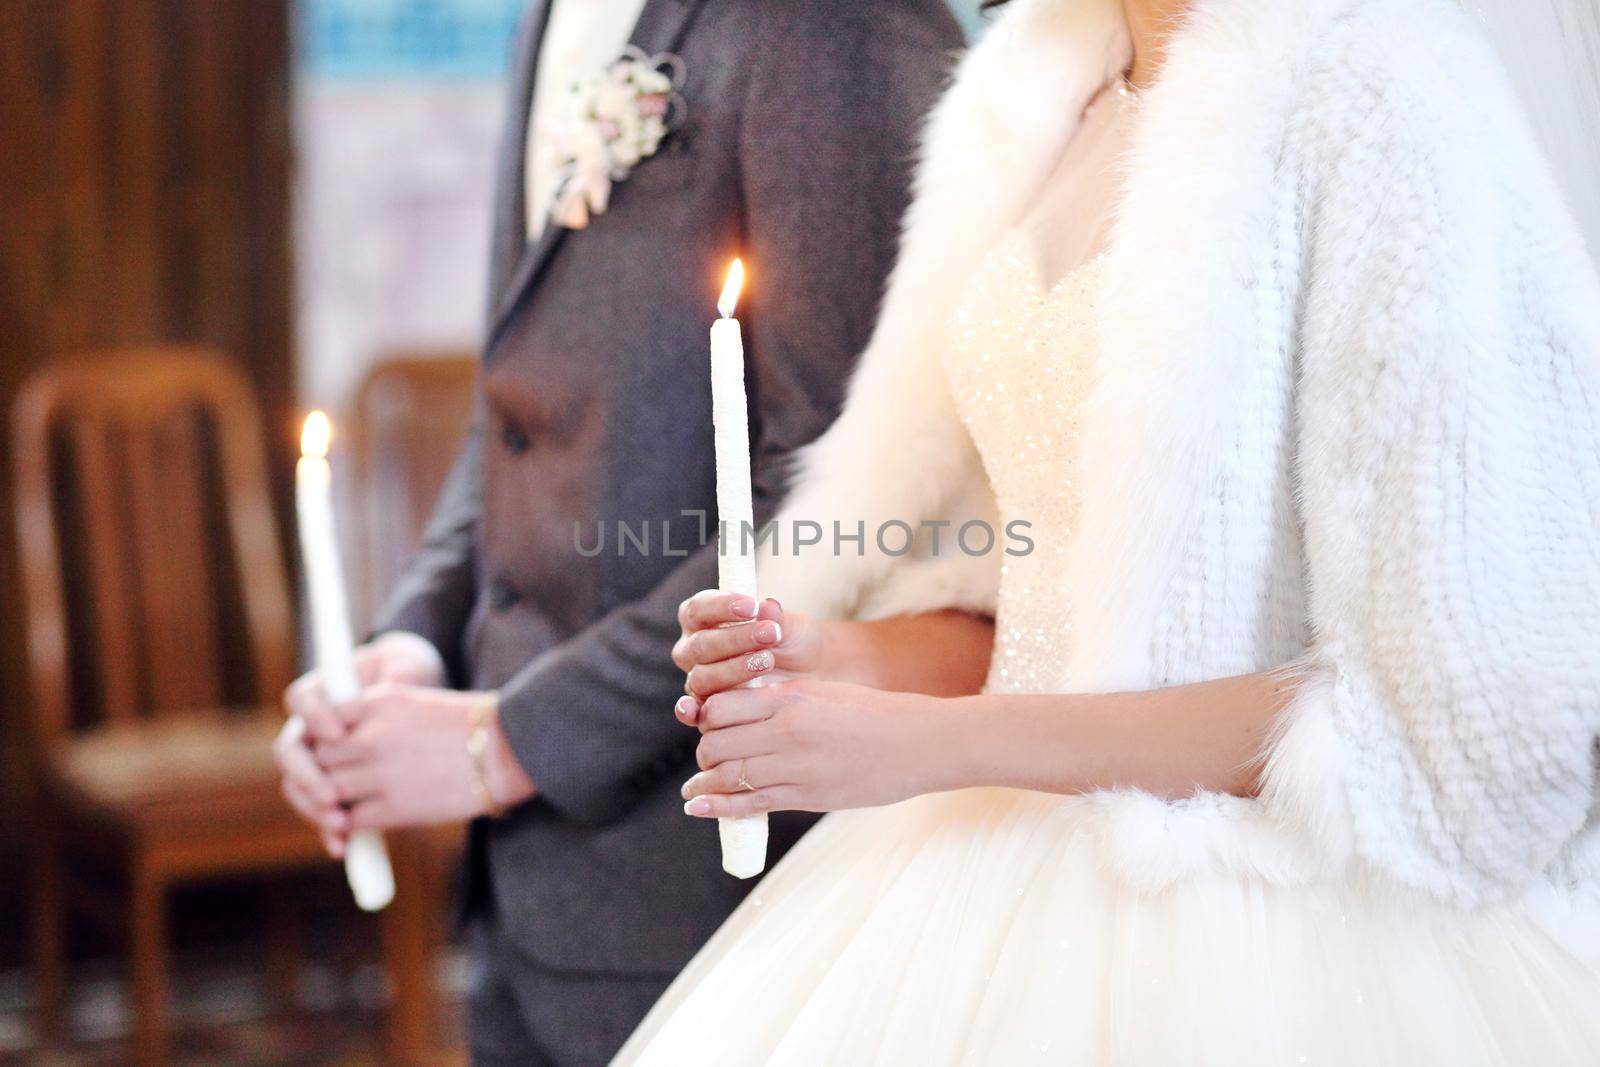 The bride, groom holds in hands wedding candle. Burn candle. Spiritual couple holding candles during wedding ceremony in christian church. close up.